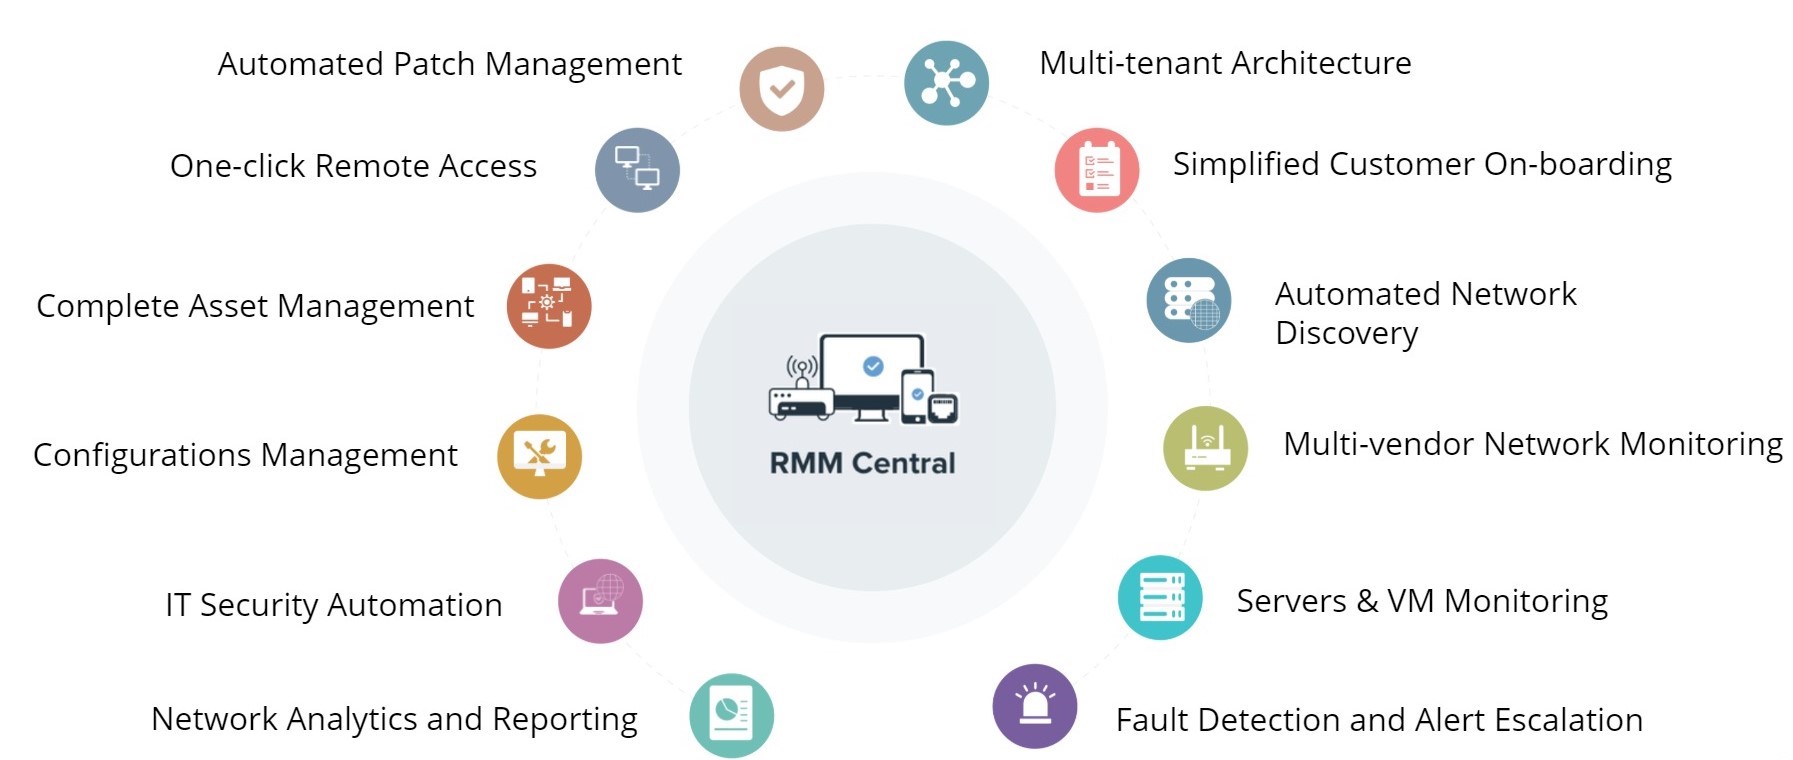 What is RMM ? Remote Monitoring Management explained - TeamViewer